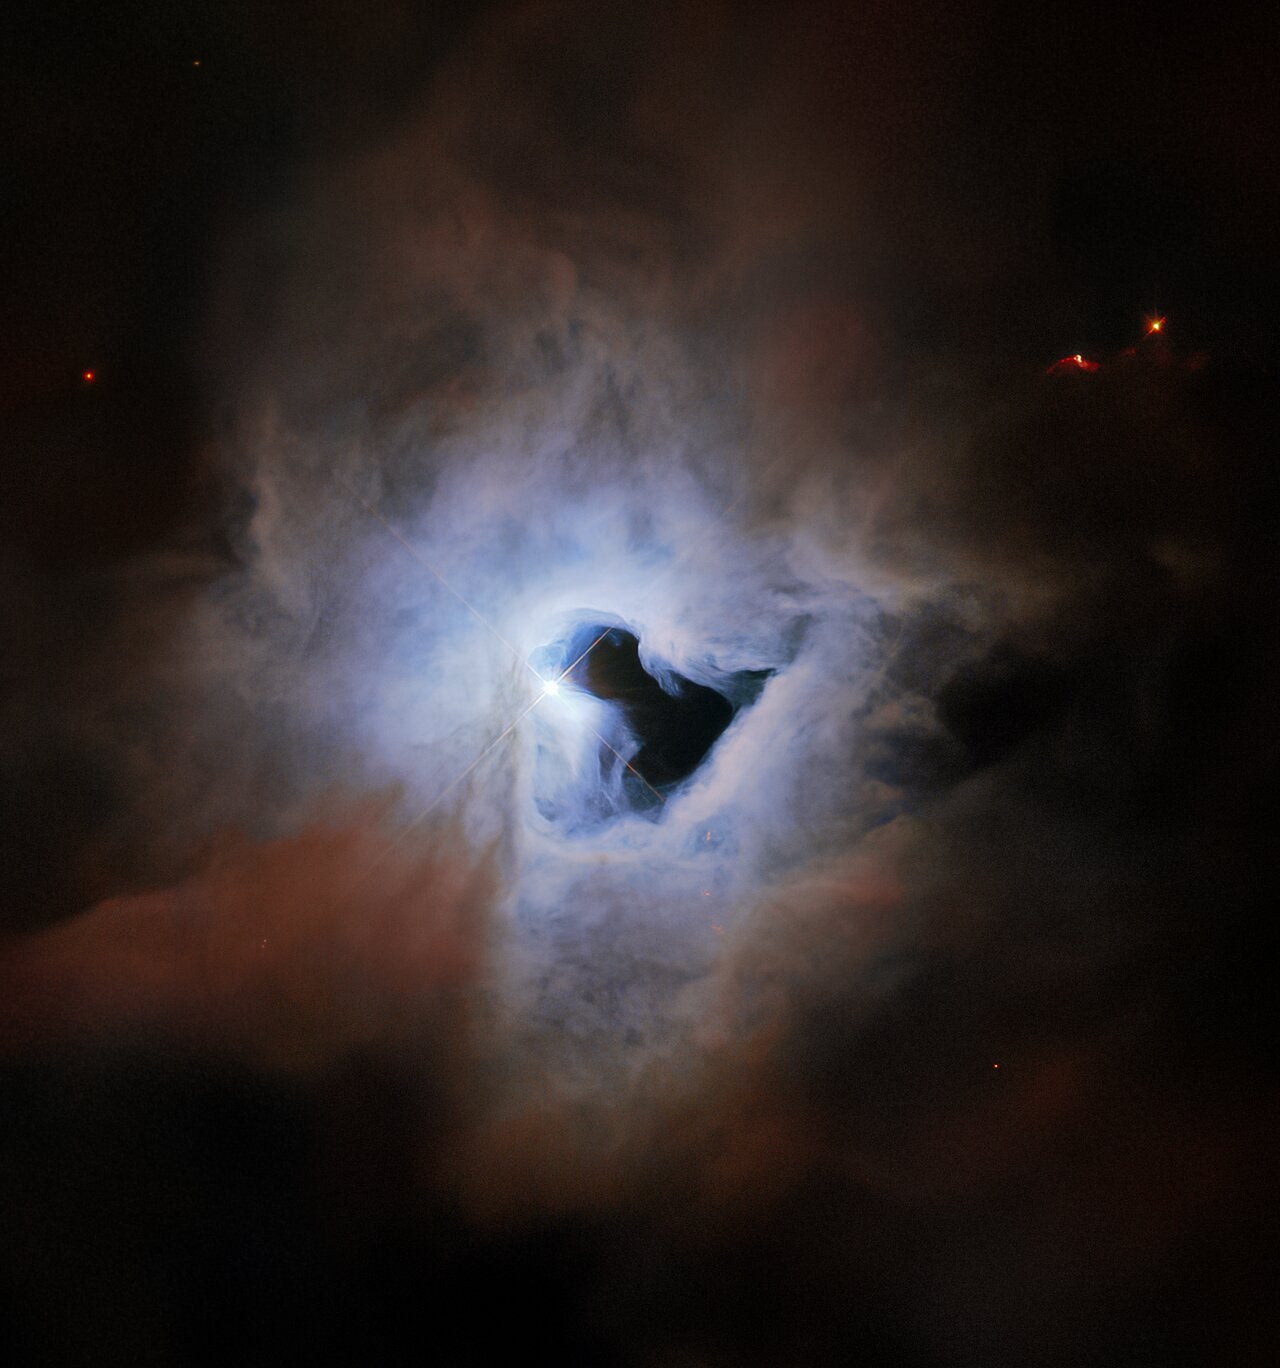 The reflection nebular NGC 1999 lies about 1,350 light years from Earth in the constellation Orion, and exhibits an inky black central “keyhole” in this image taken by the Hubble Space Telescope